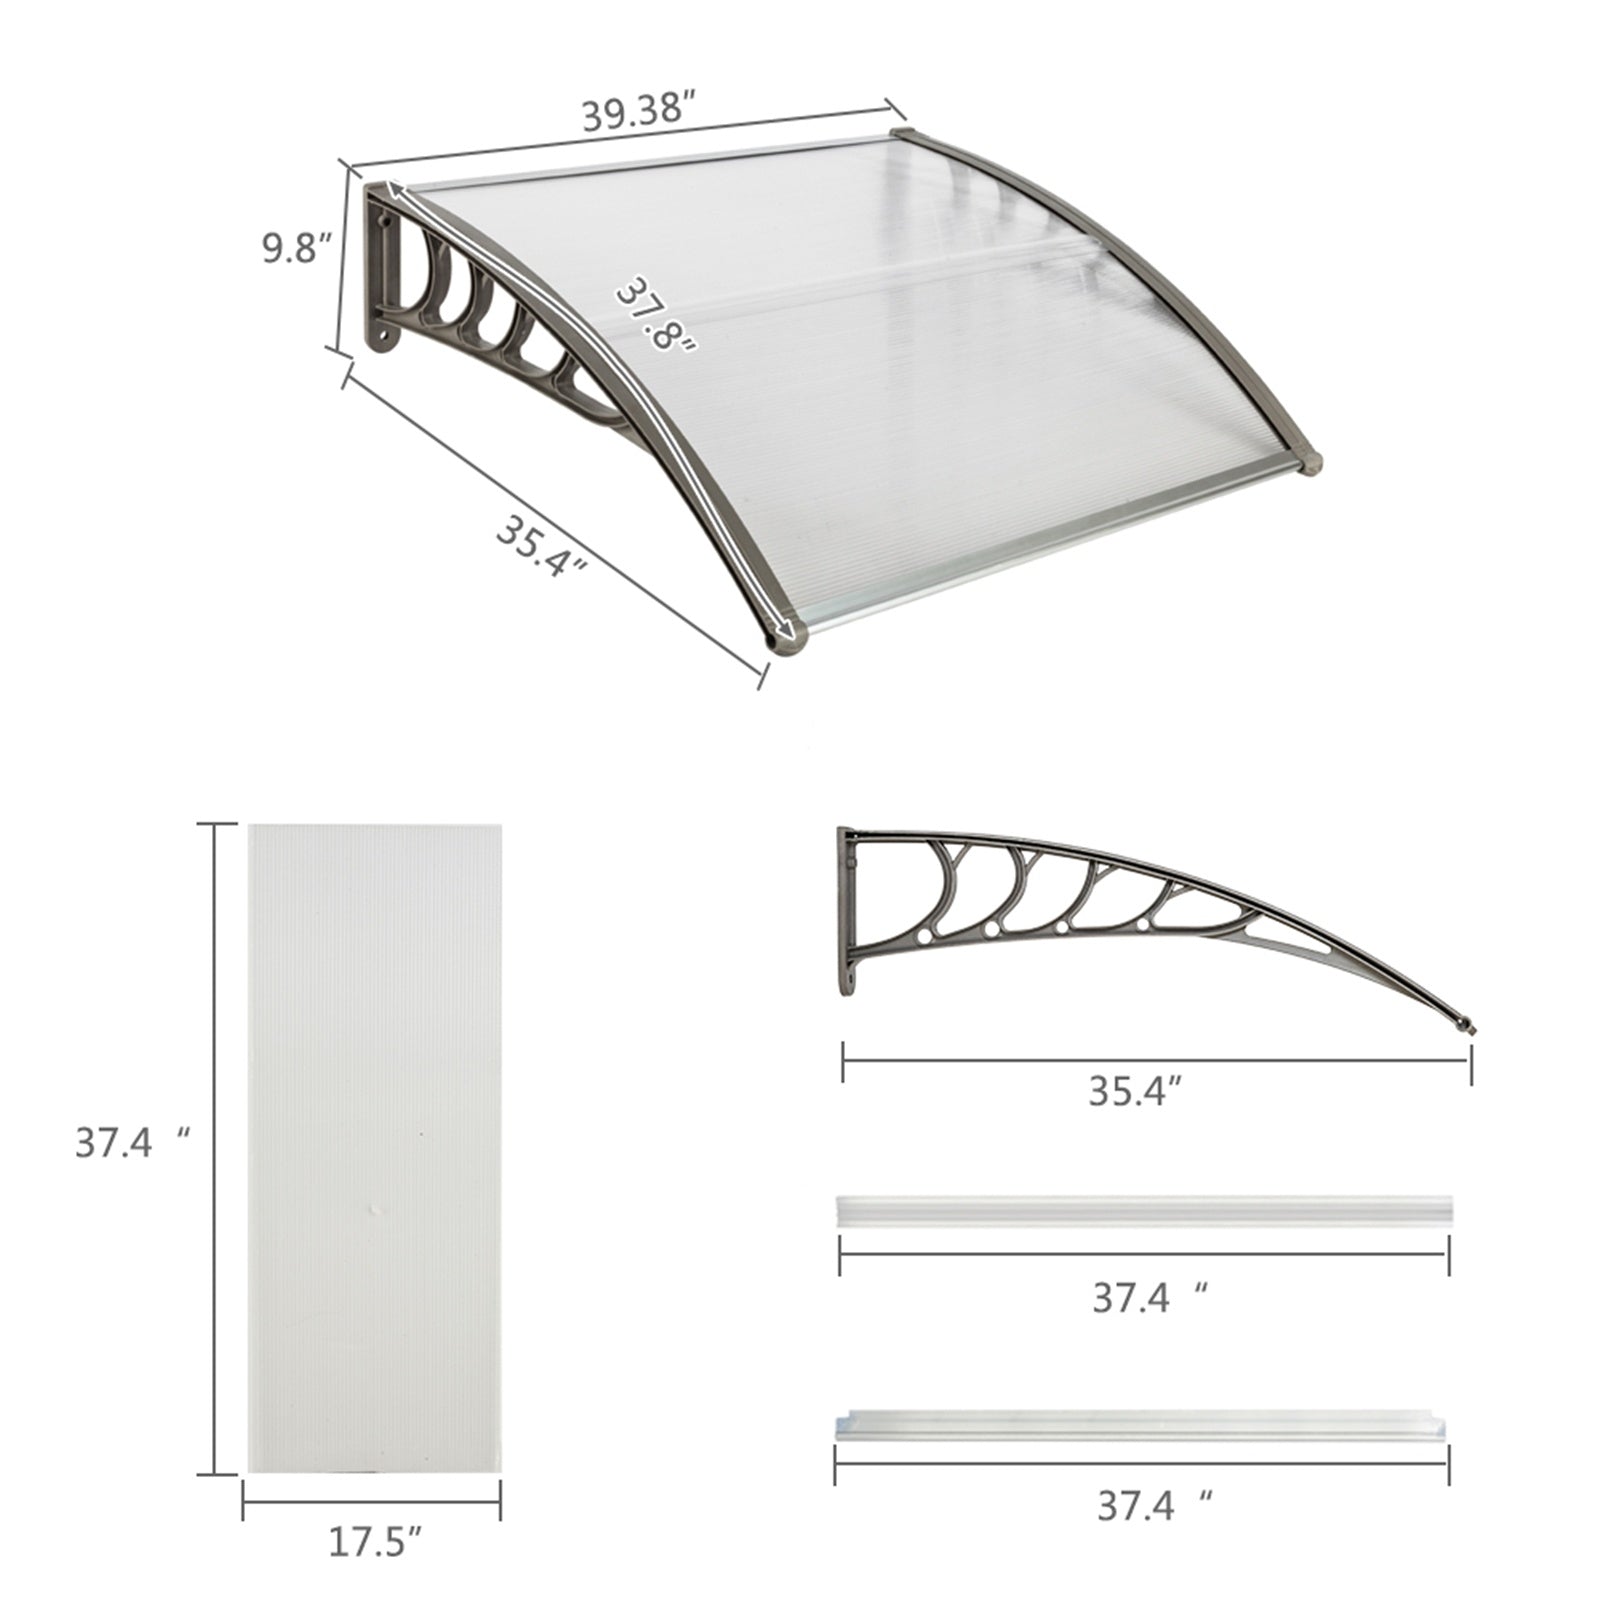 40"x 40" Outdoor Front Door Window Awning Patio Canopy Rain Cover UV Protected Eaves RT